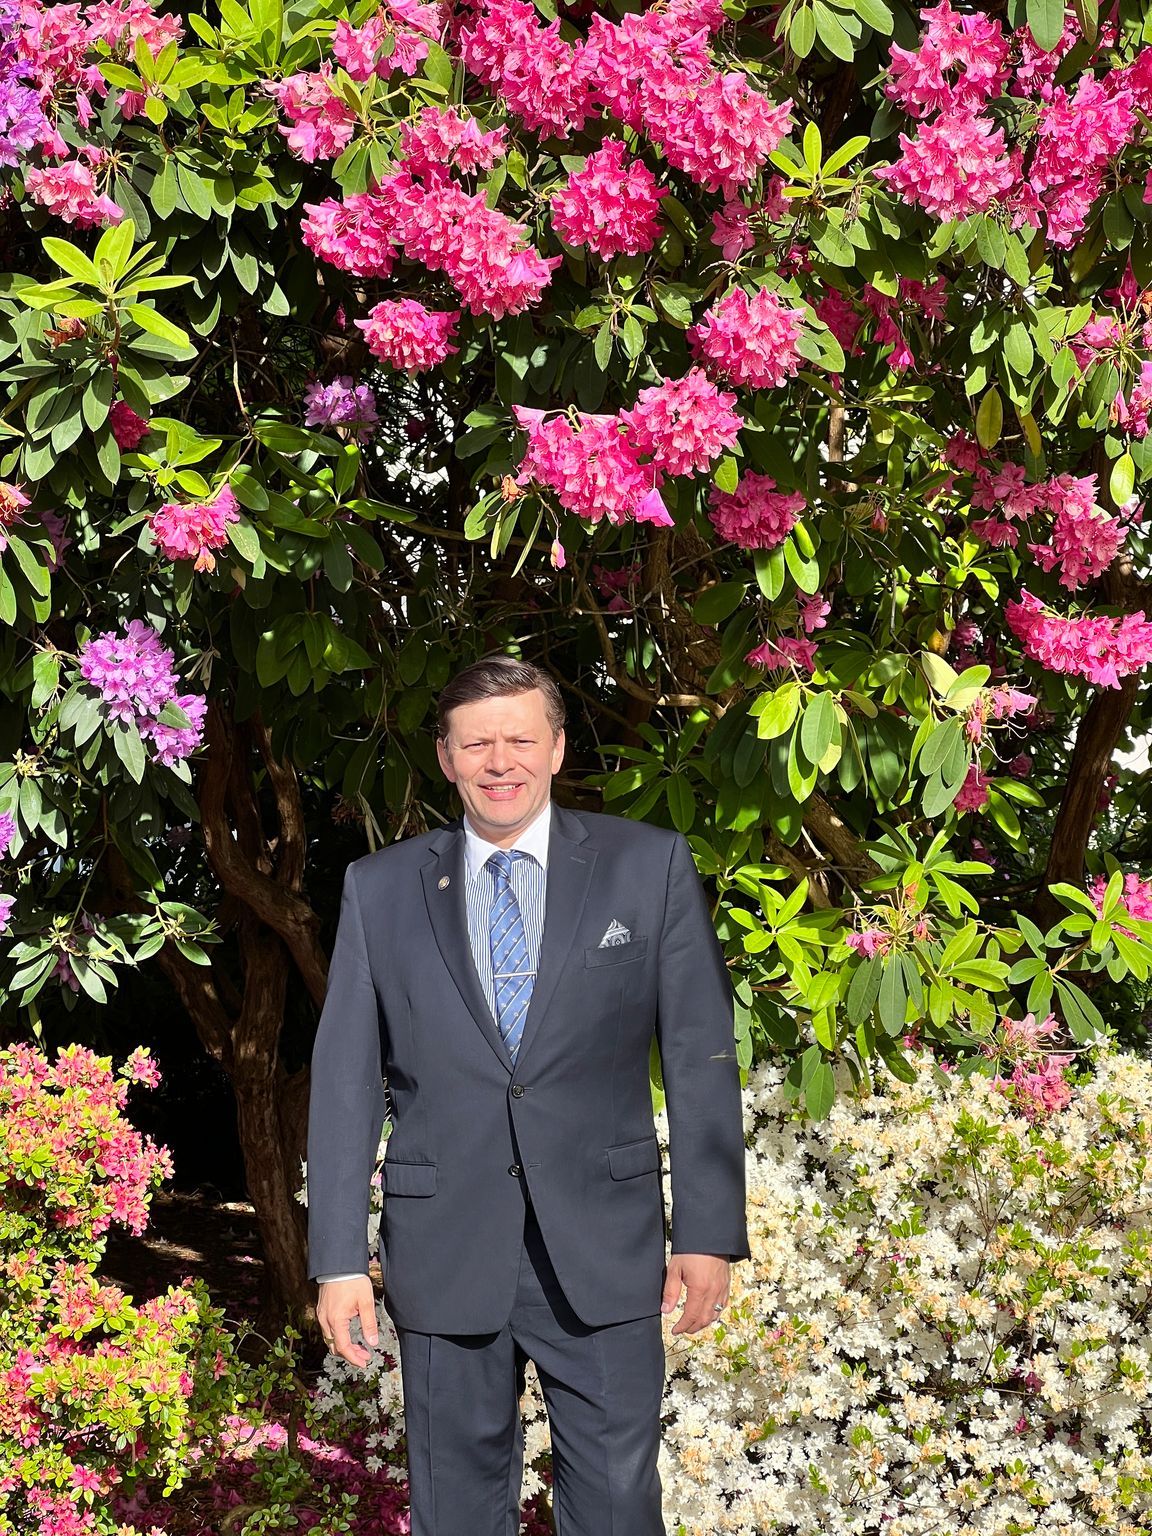 A person in a suit standing under a tree with pink flowers Description automatically generated